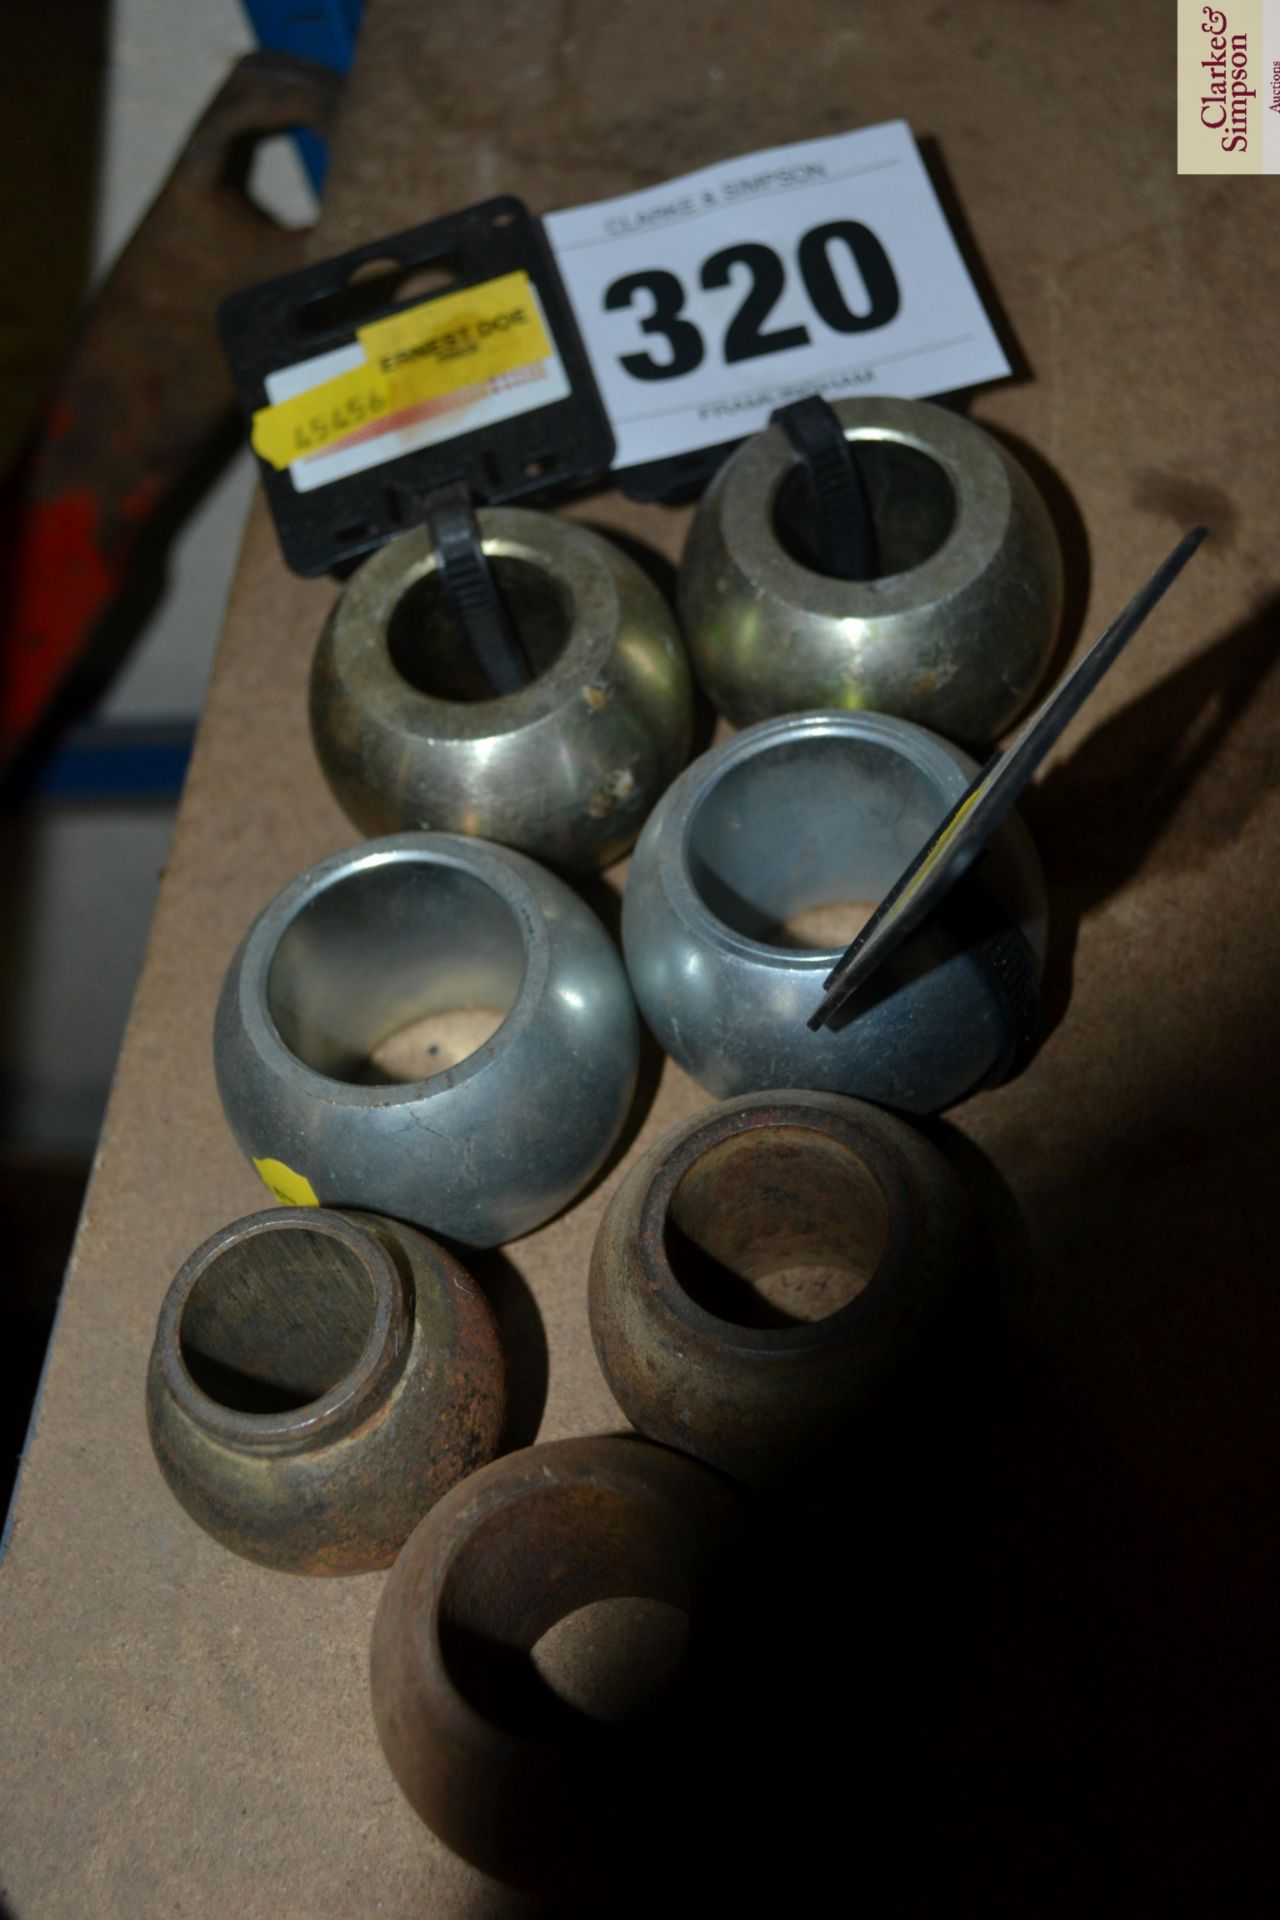 Quantity of linkage balls. For sale due to no long